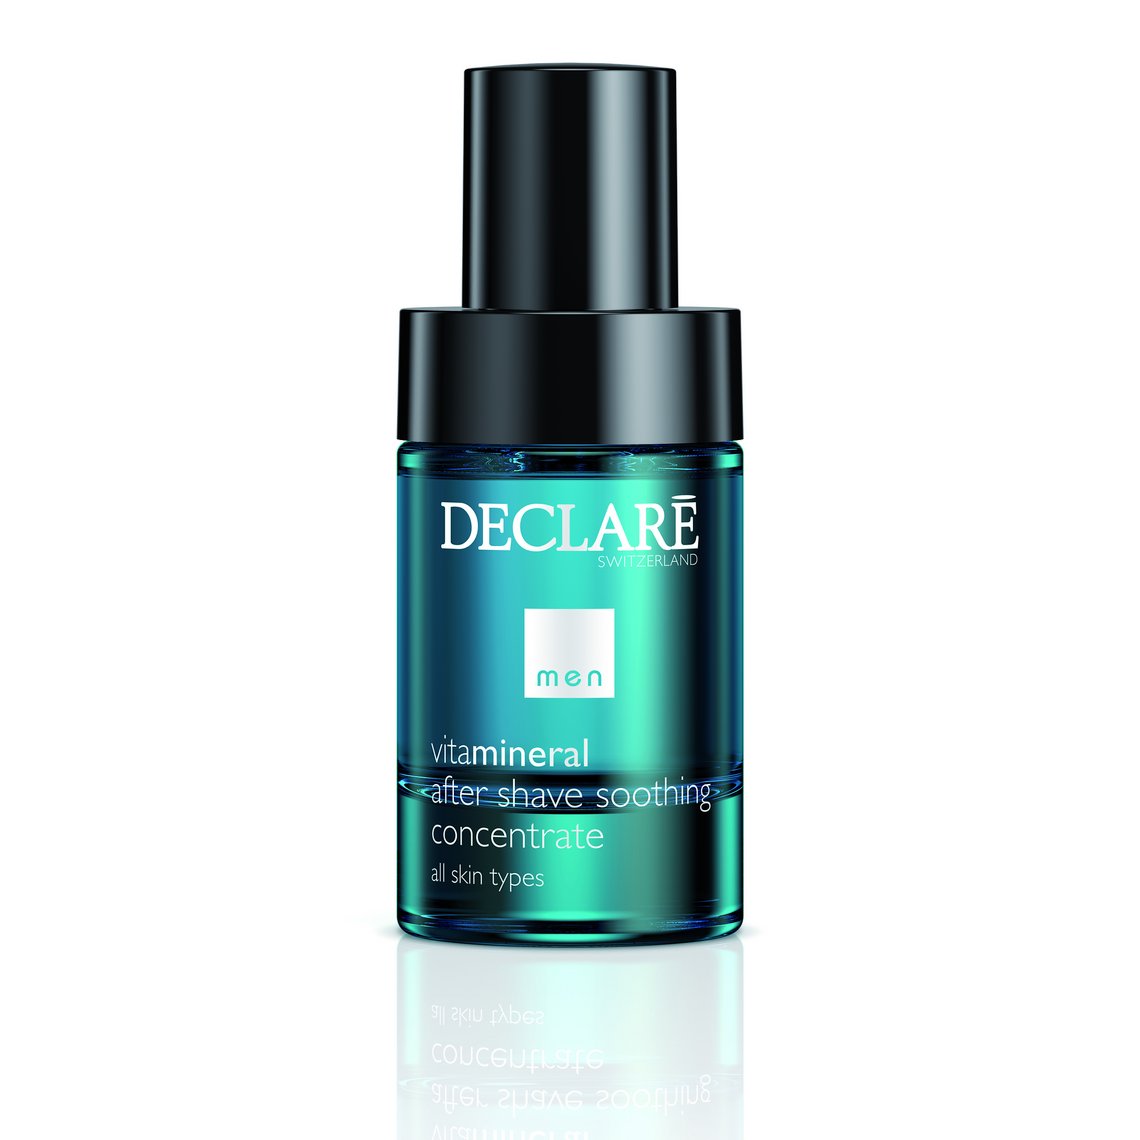 Vitamineral for Men After Shave Soothing Concentrate:Declaré